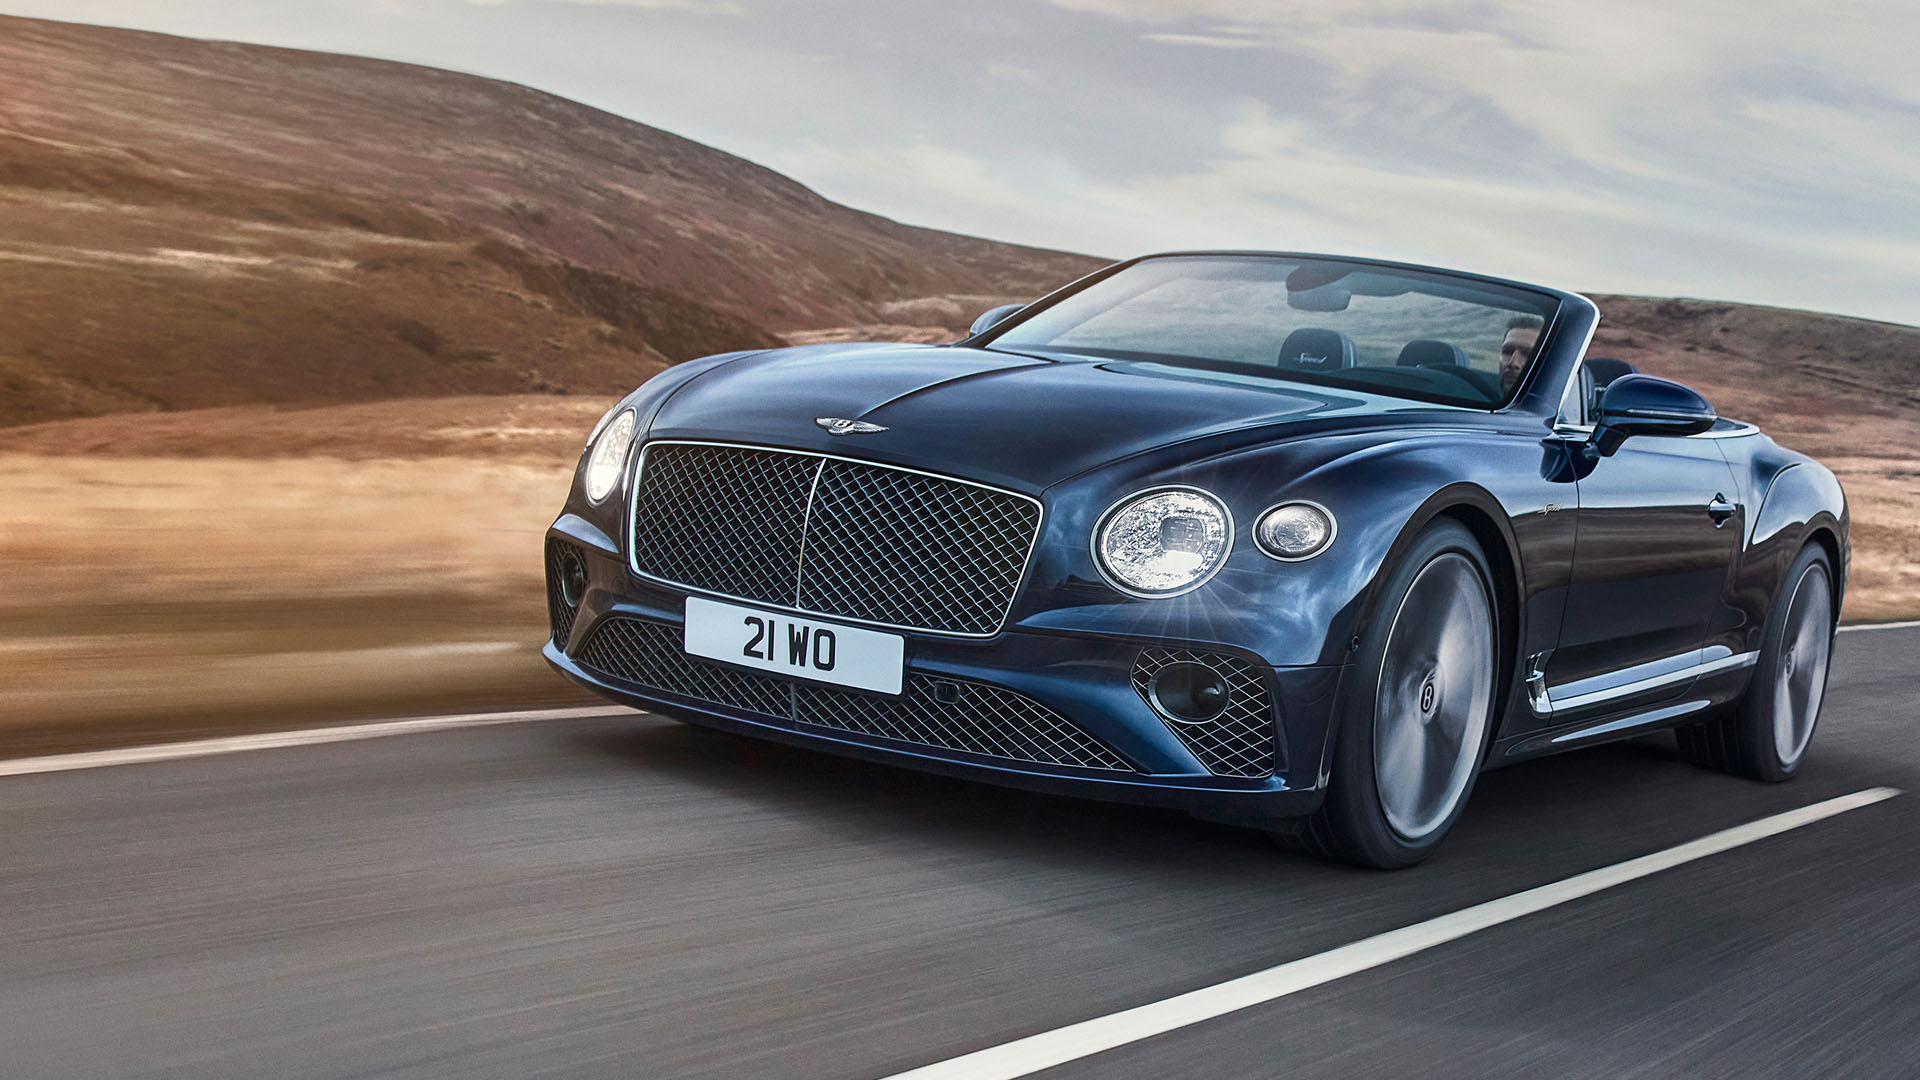 The Continental GT Speed Convertible